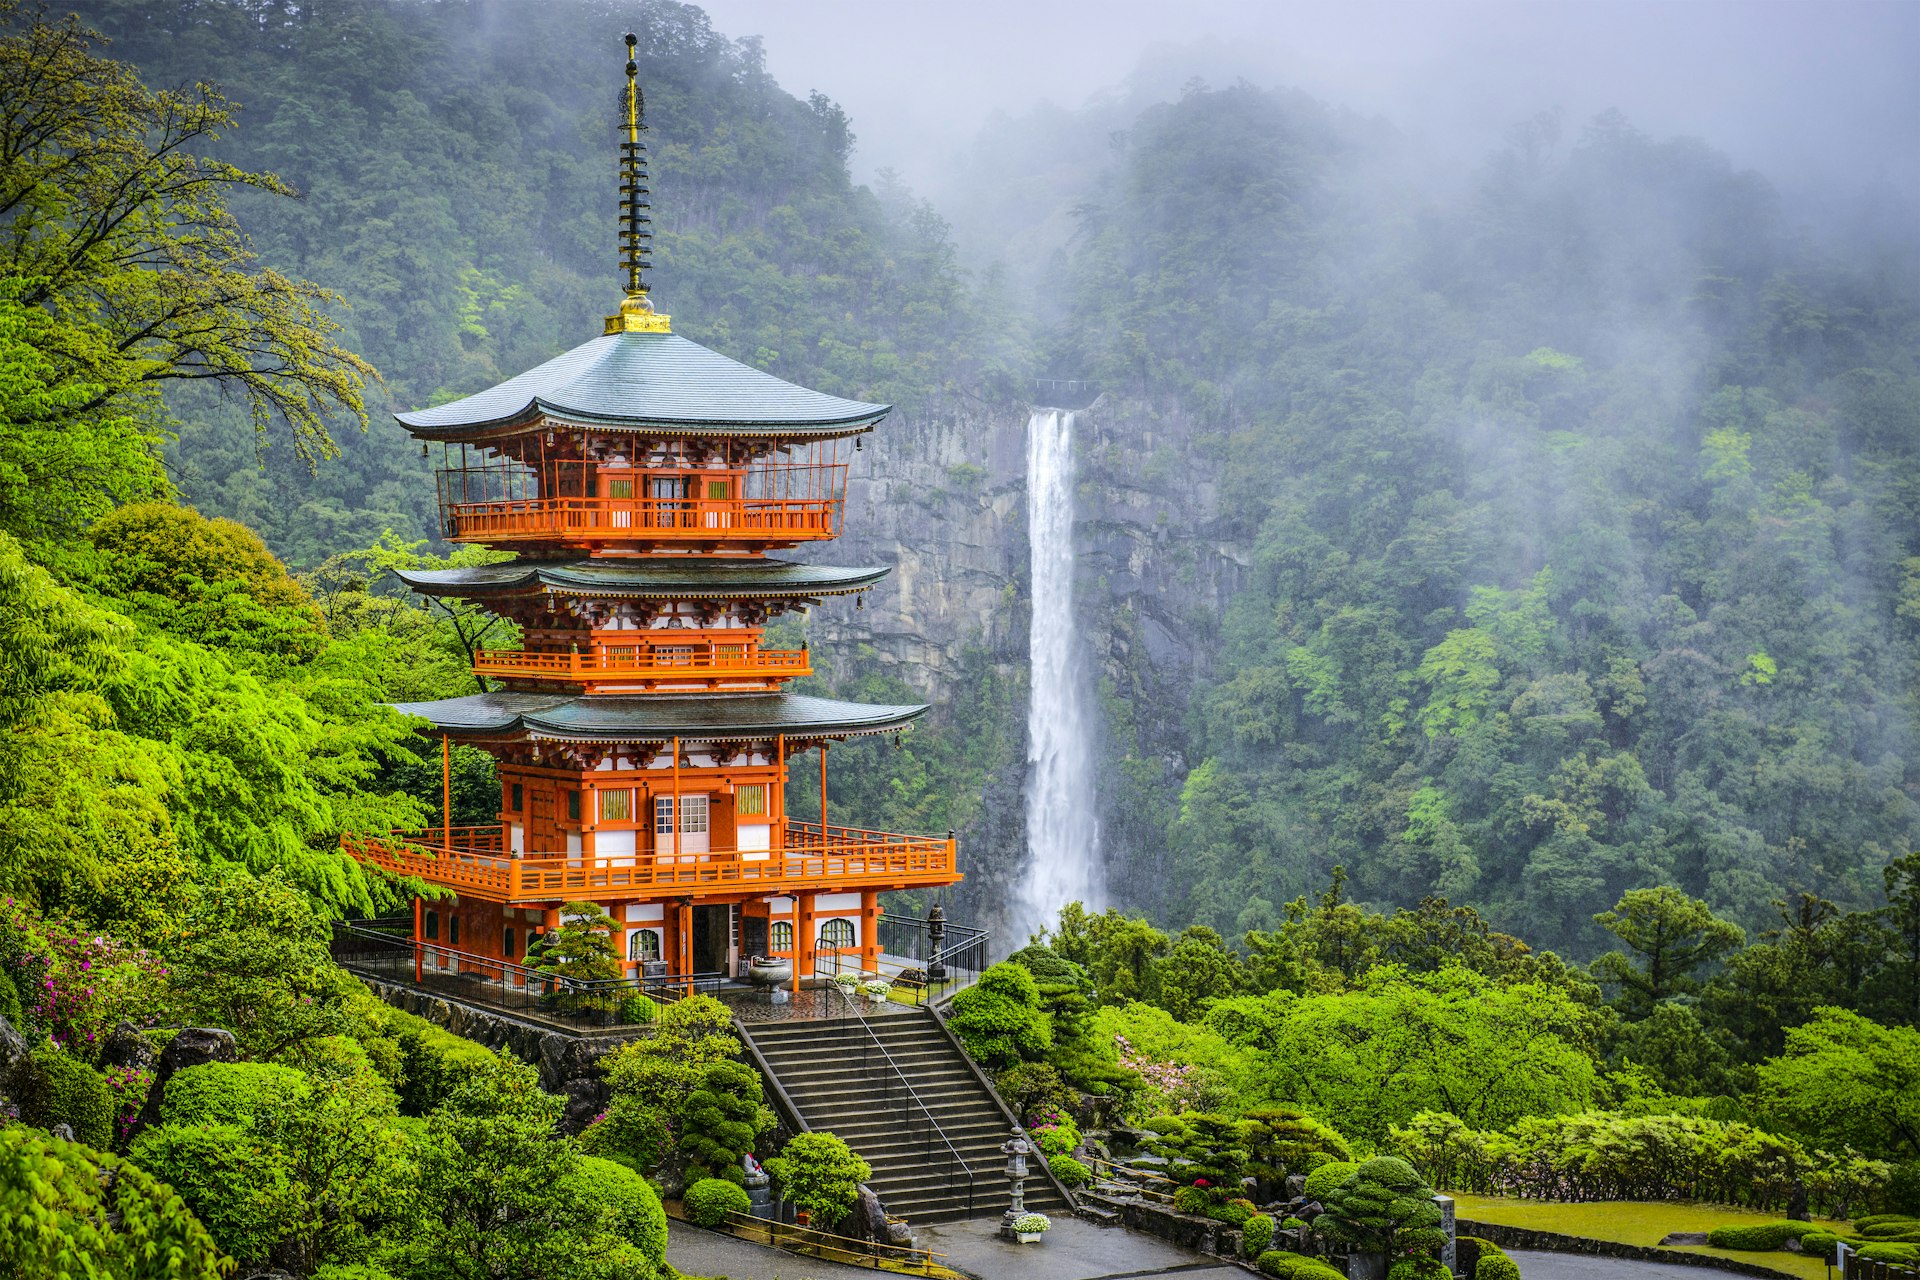 A red pagoda stands among thick green woodland, with a thin waterfall cascading down a rockface